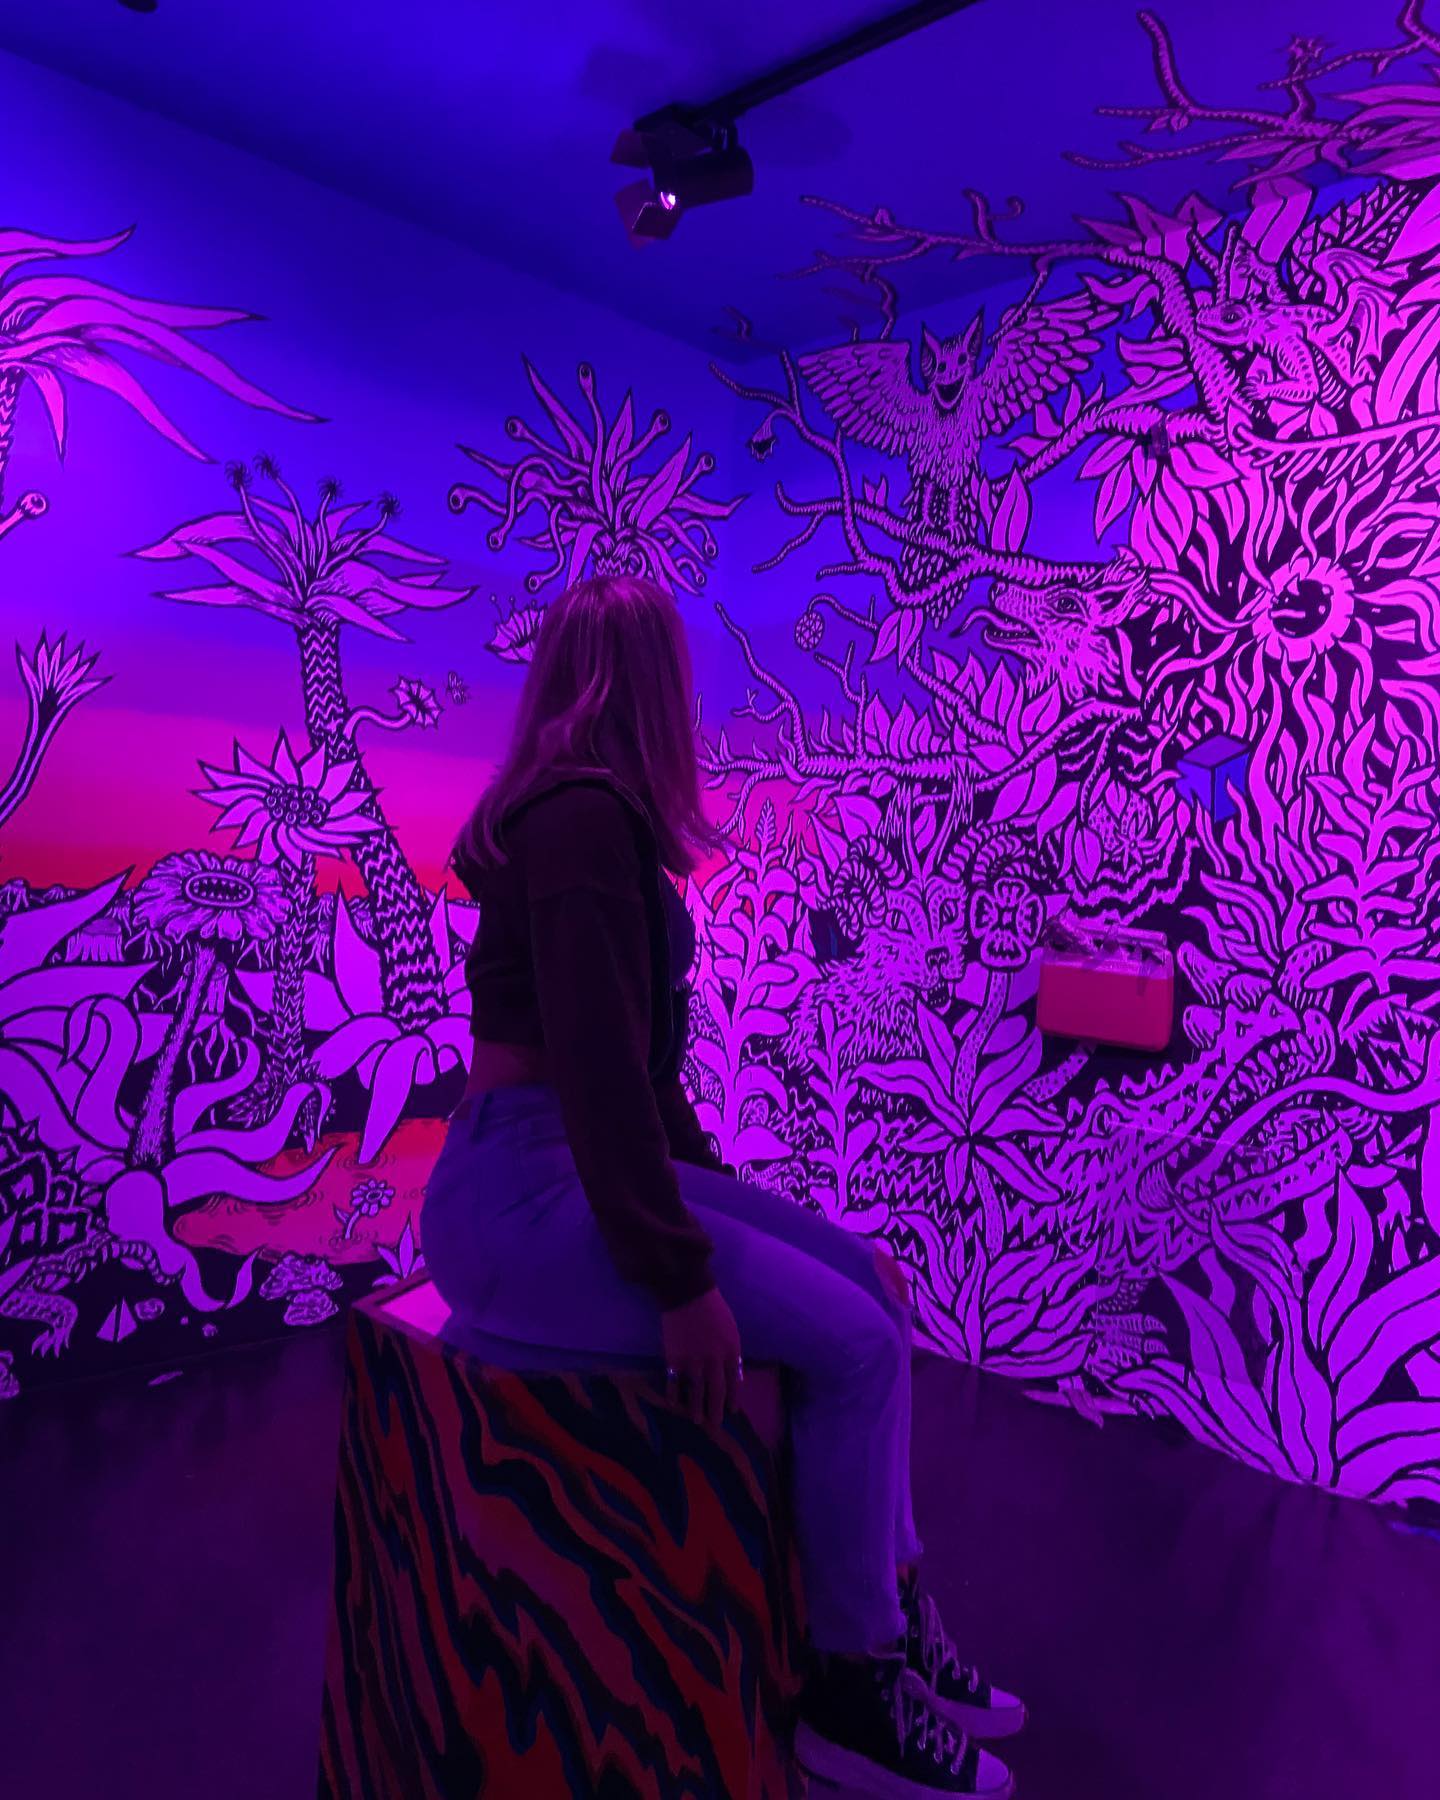 1672174140 15 Meow wolf the other day Vega Thompson